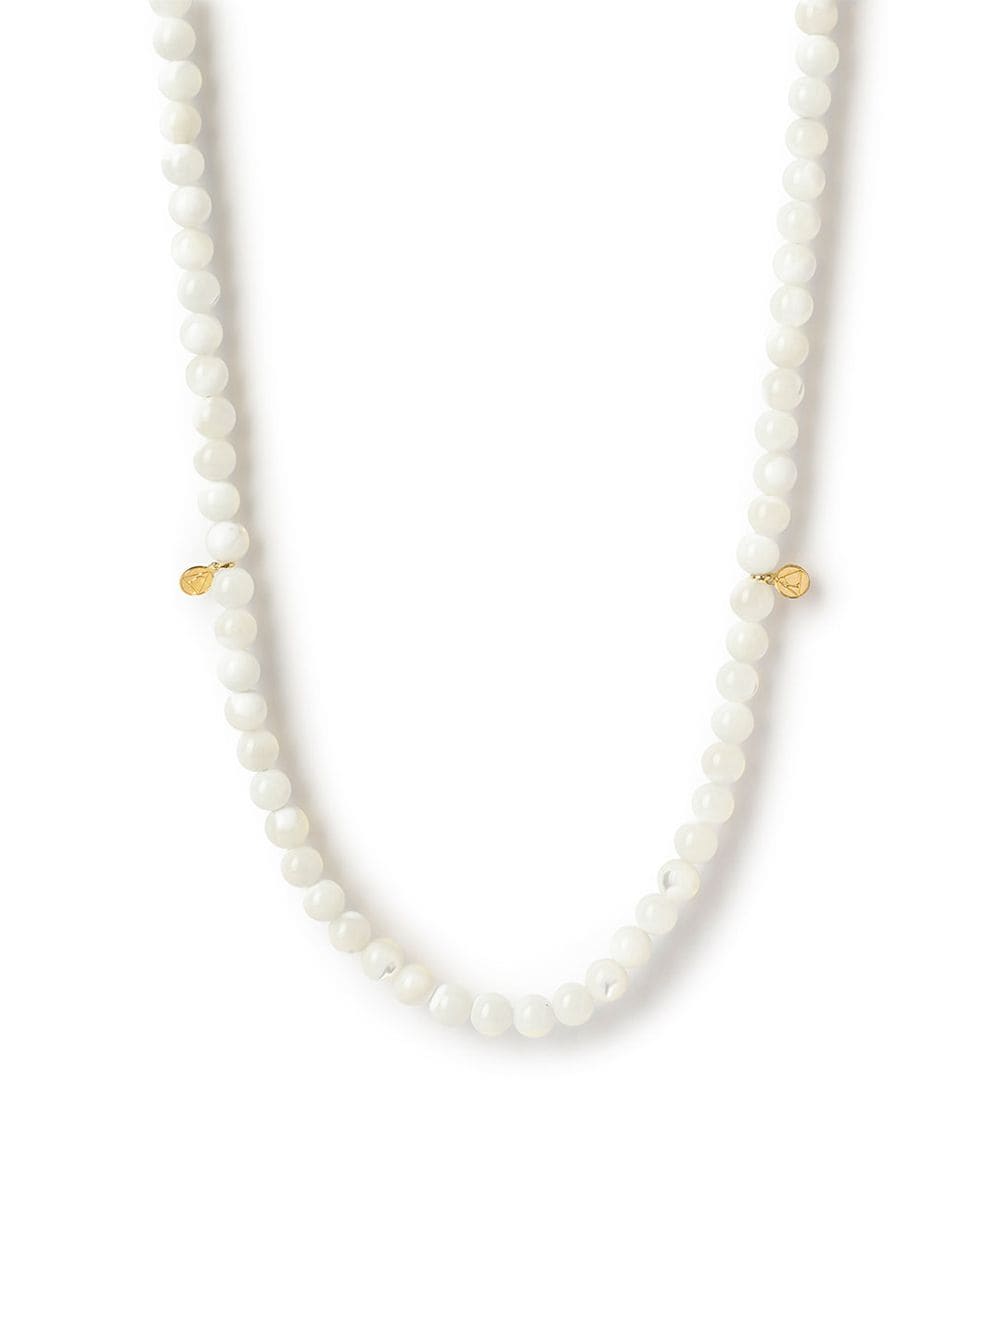 THE ALKEMISTRY 18KT PEARL NECKLACE